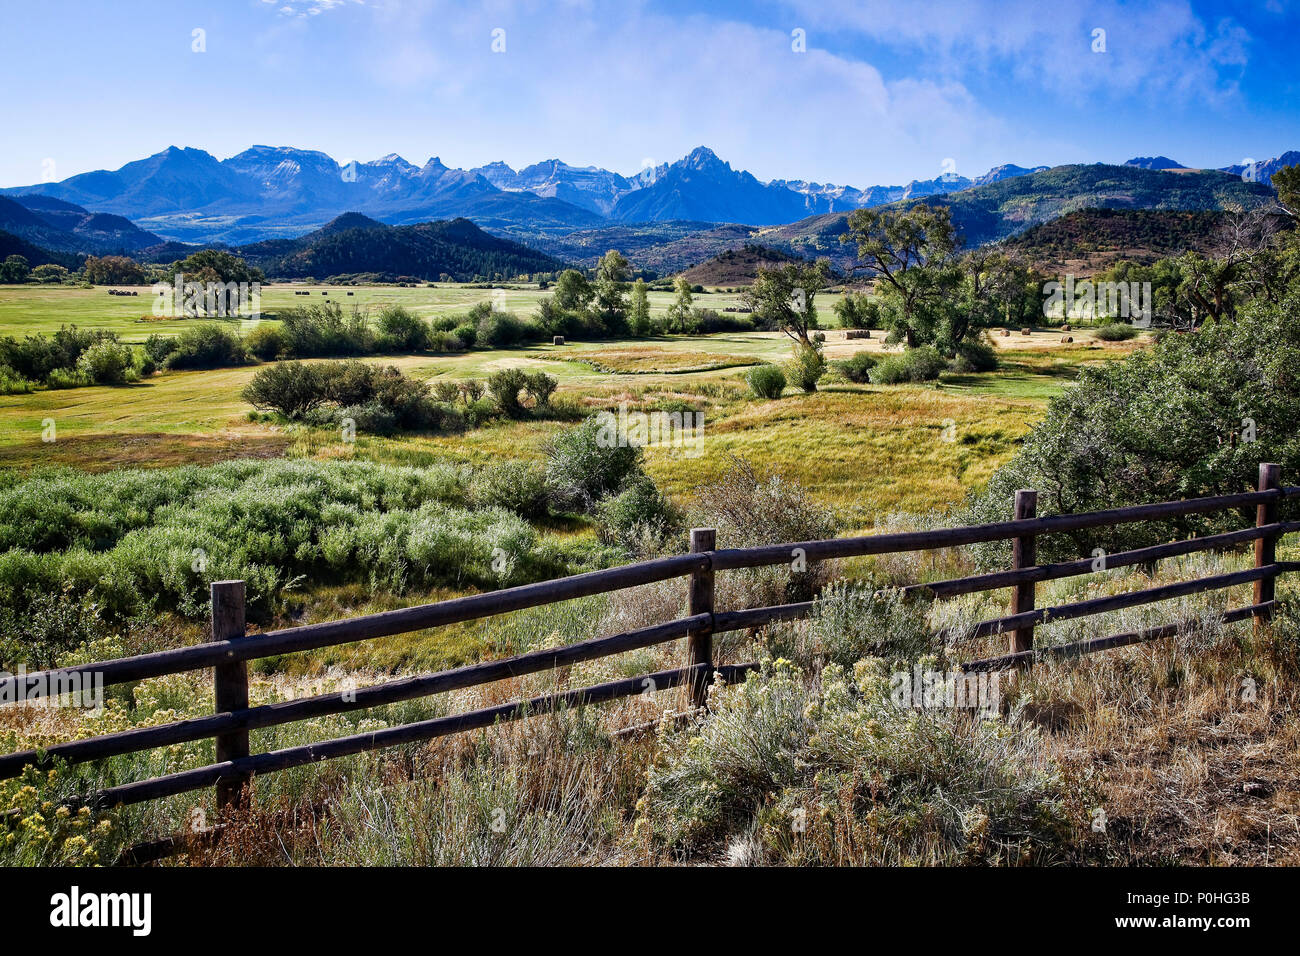 Ranches lead up to the San Juan Mountains in Colorado, USA. Stock Photo